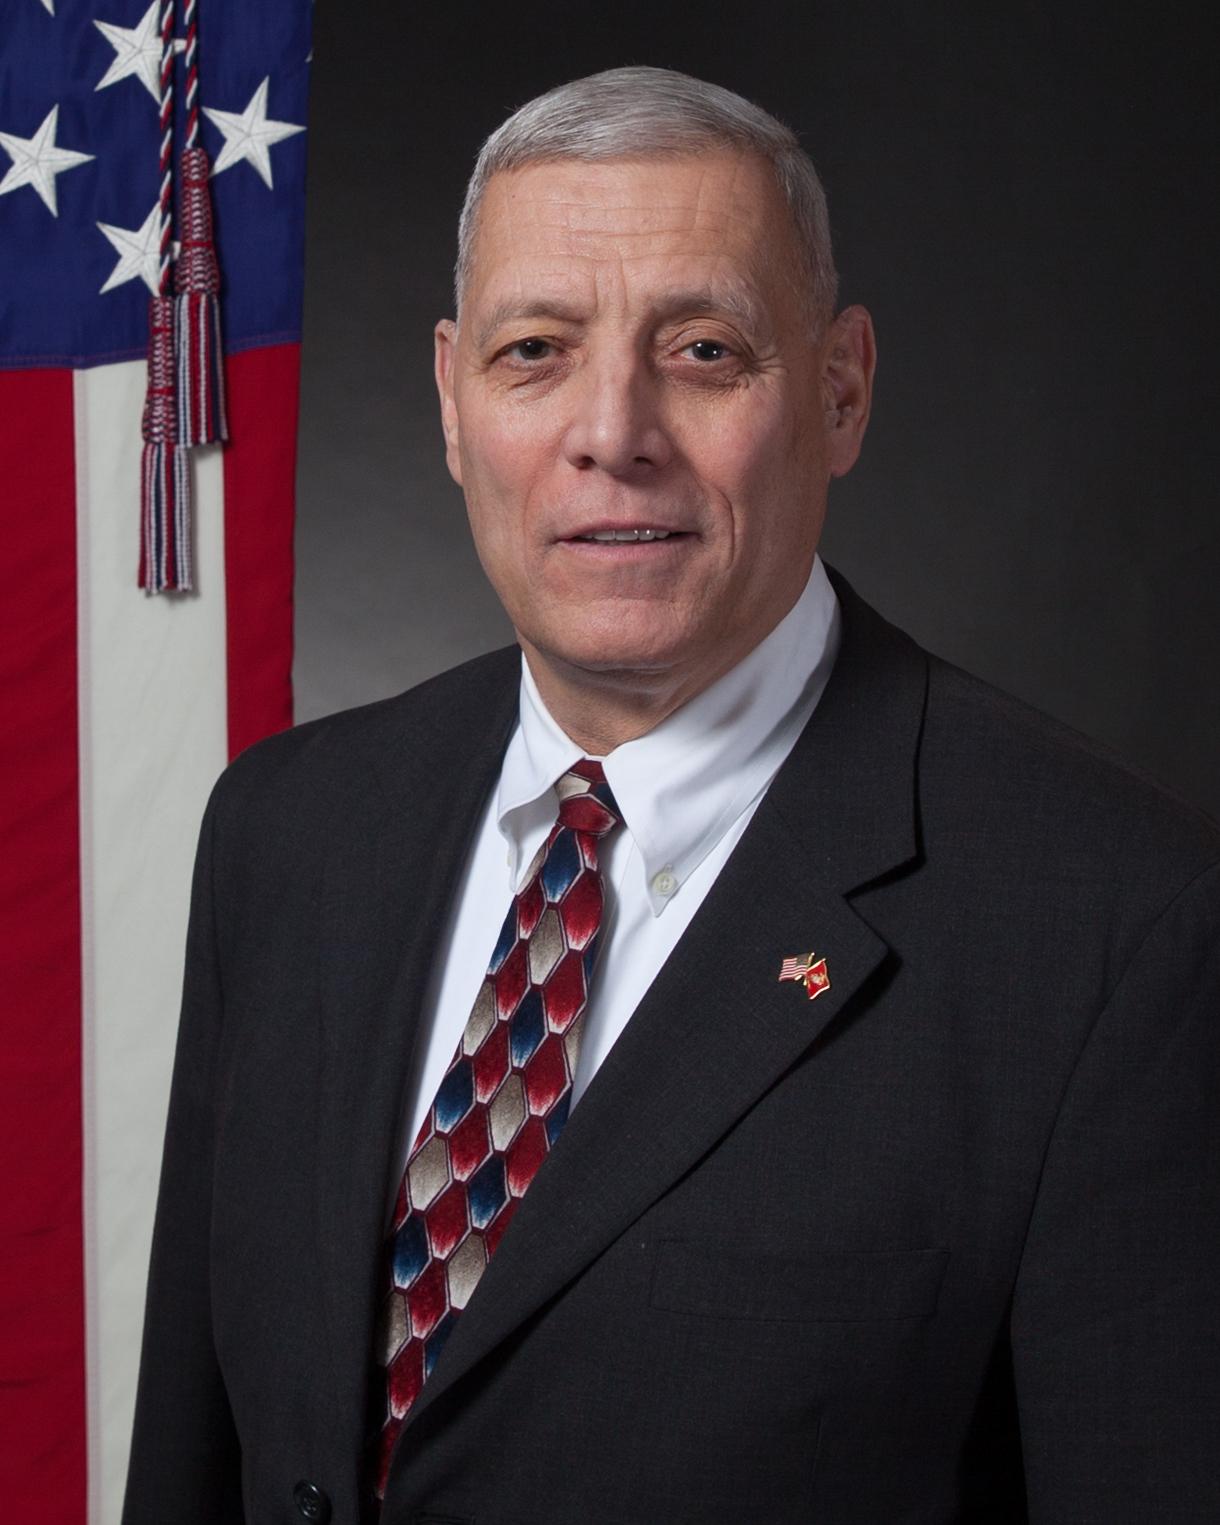 Marine Corps General John “Jay” Paxton Jr. (Ret) has joined the Council of Directors of The Henry M. Jackson Foundation for the Advancement of Military Medicine, Inc.